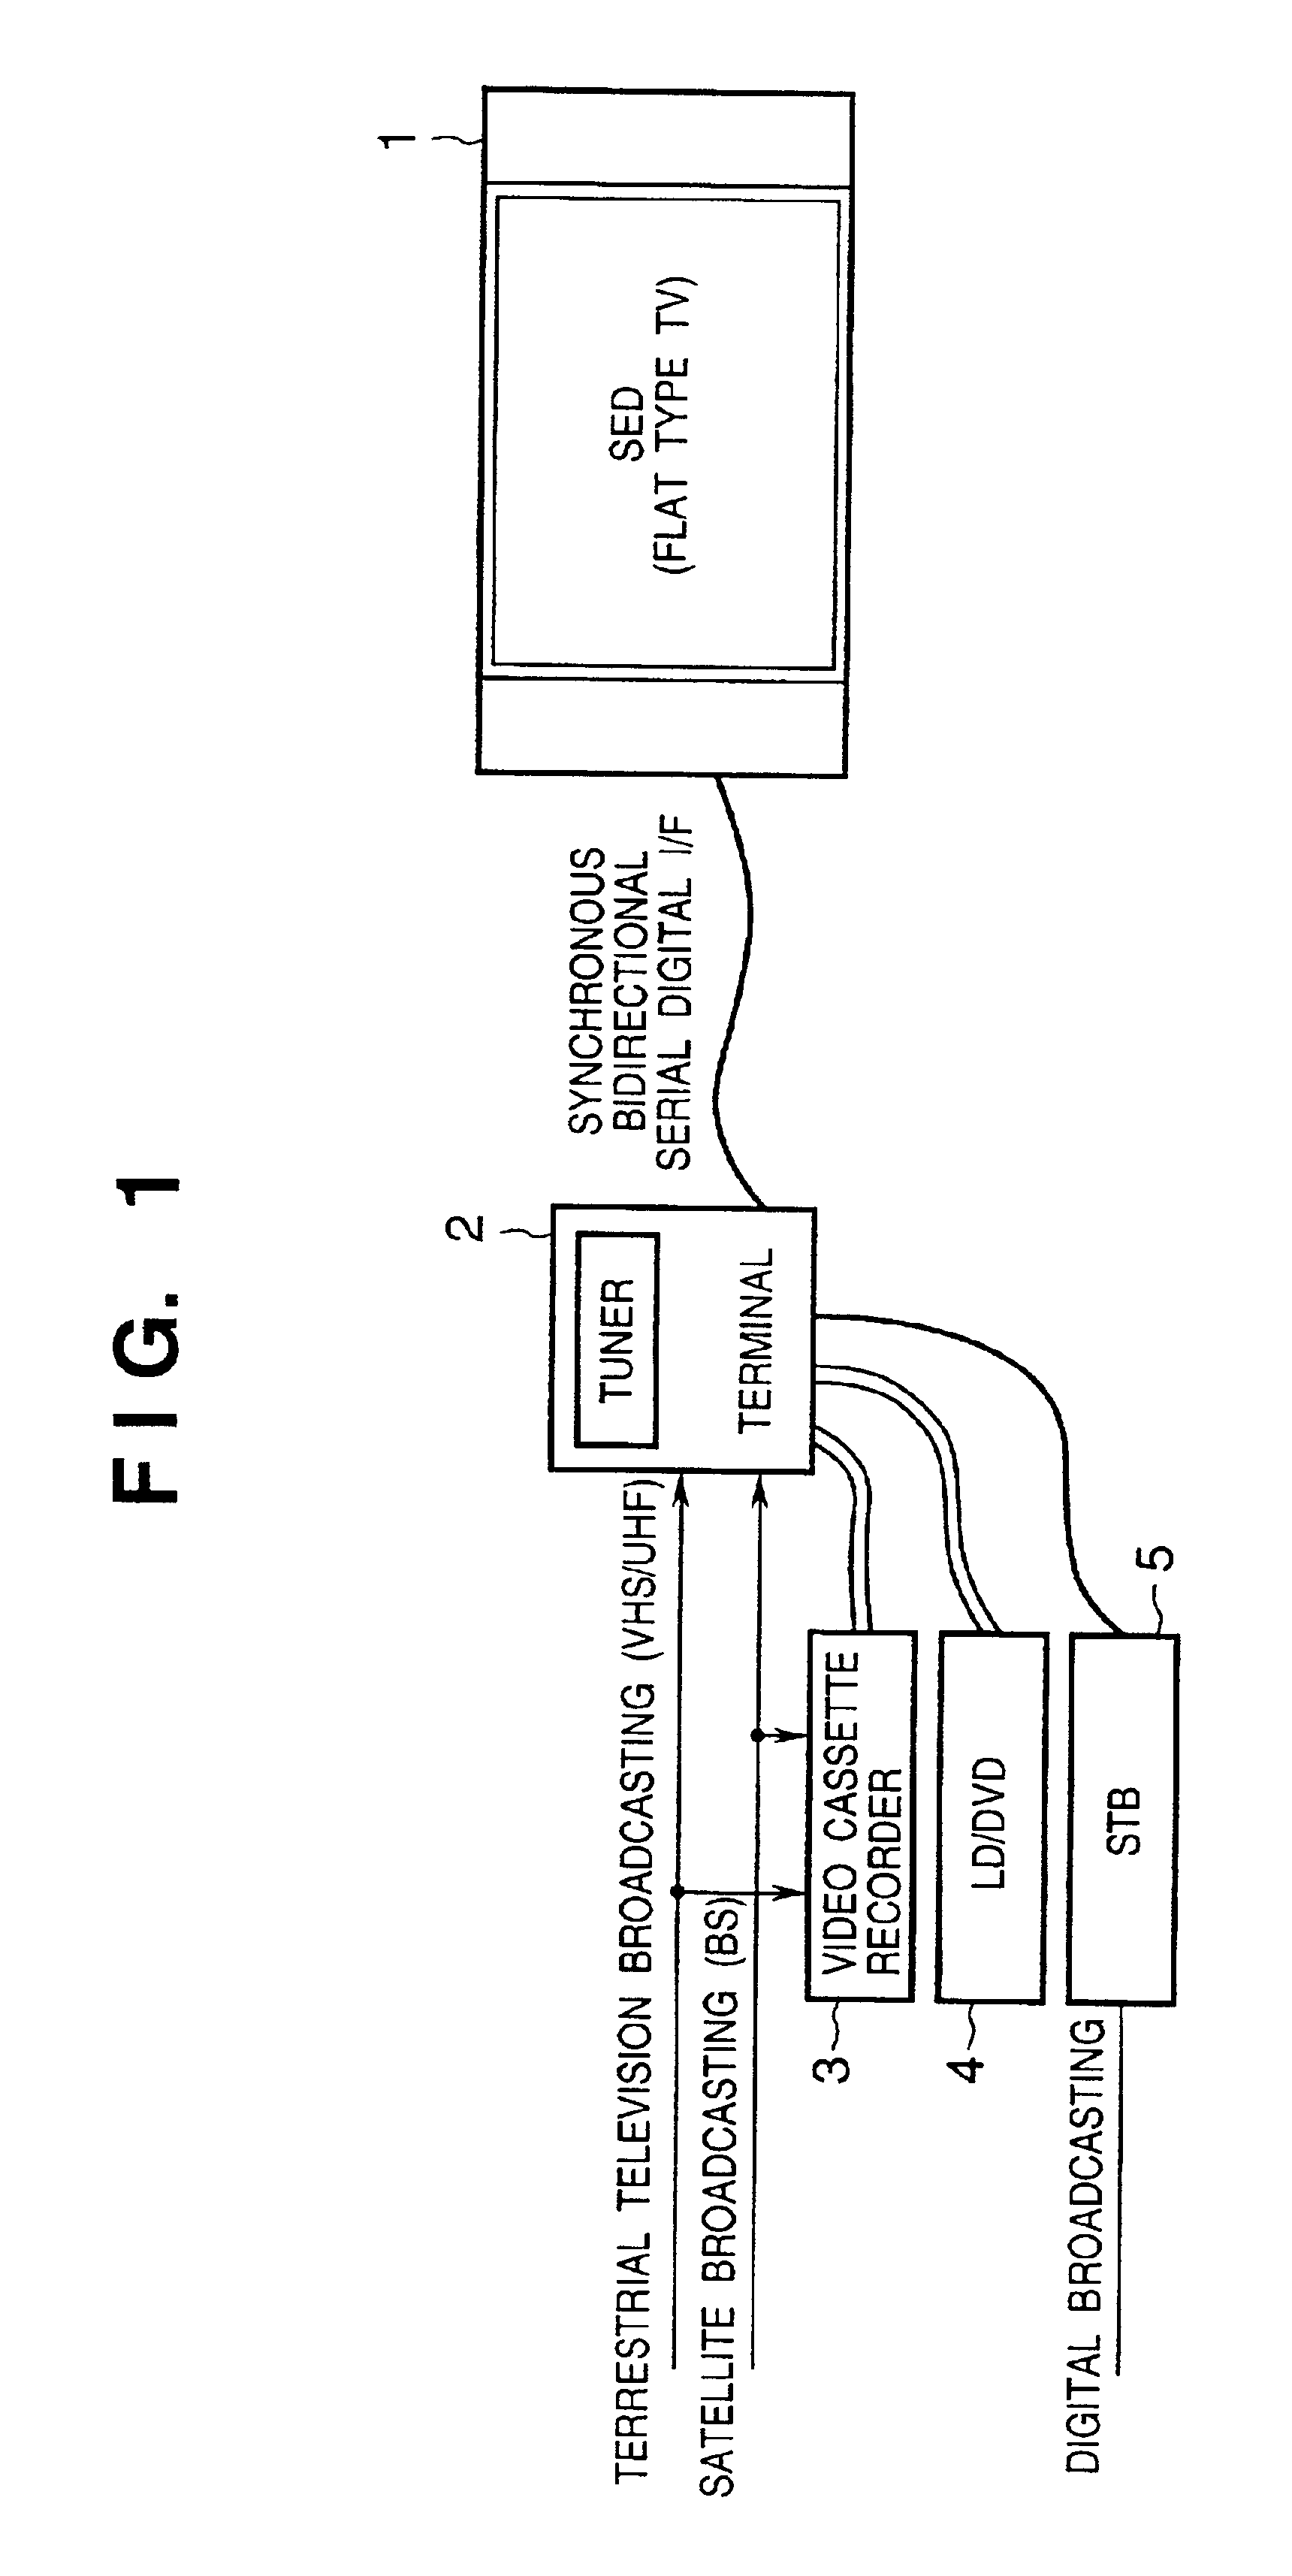 Image display control system and method allowing connection of various kinds of image displays to one supply source